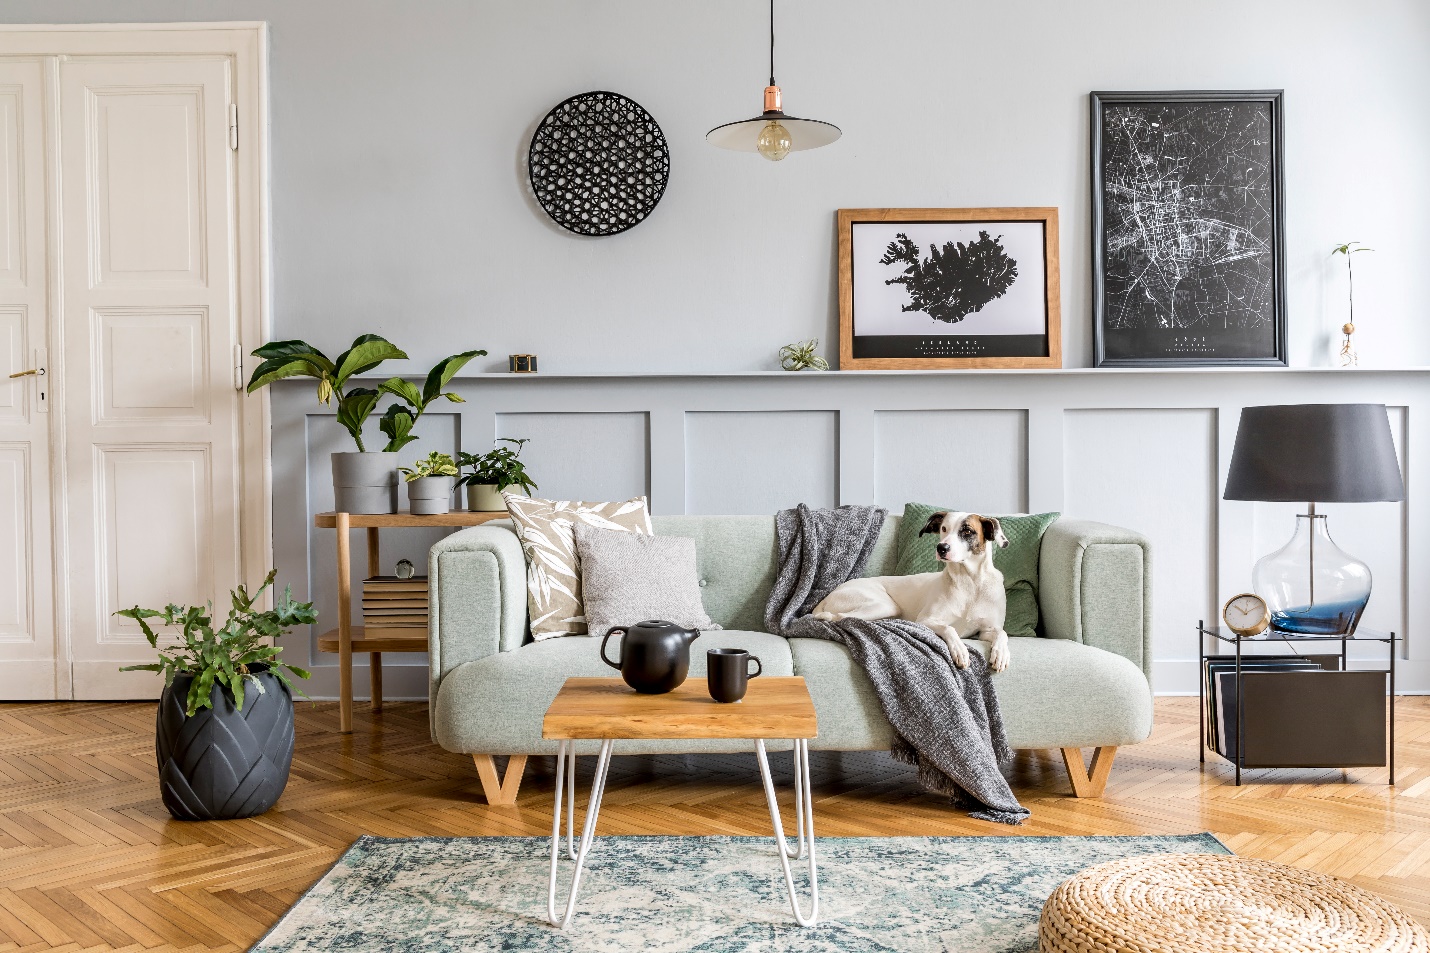 A living room with a grey couch and a dog that is inviting.